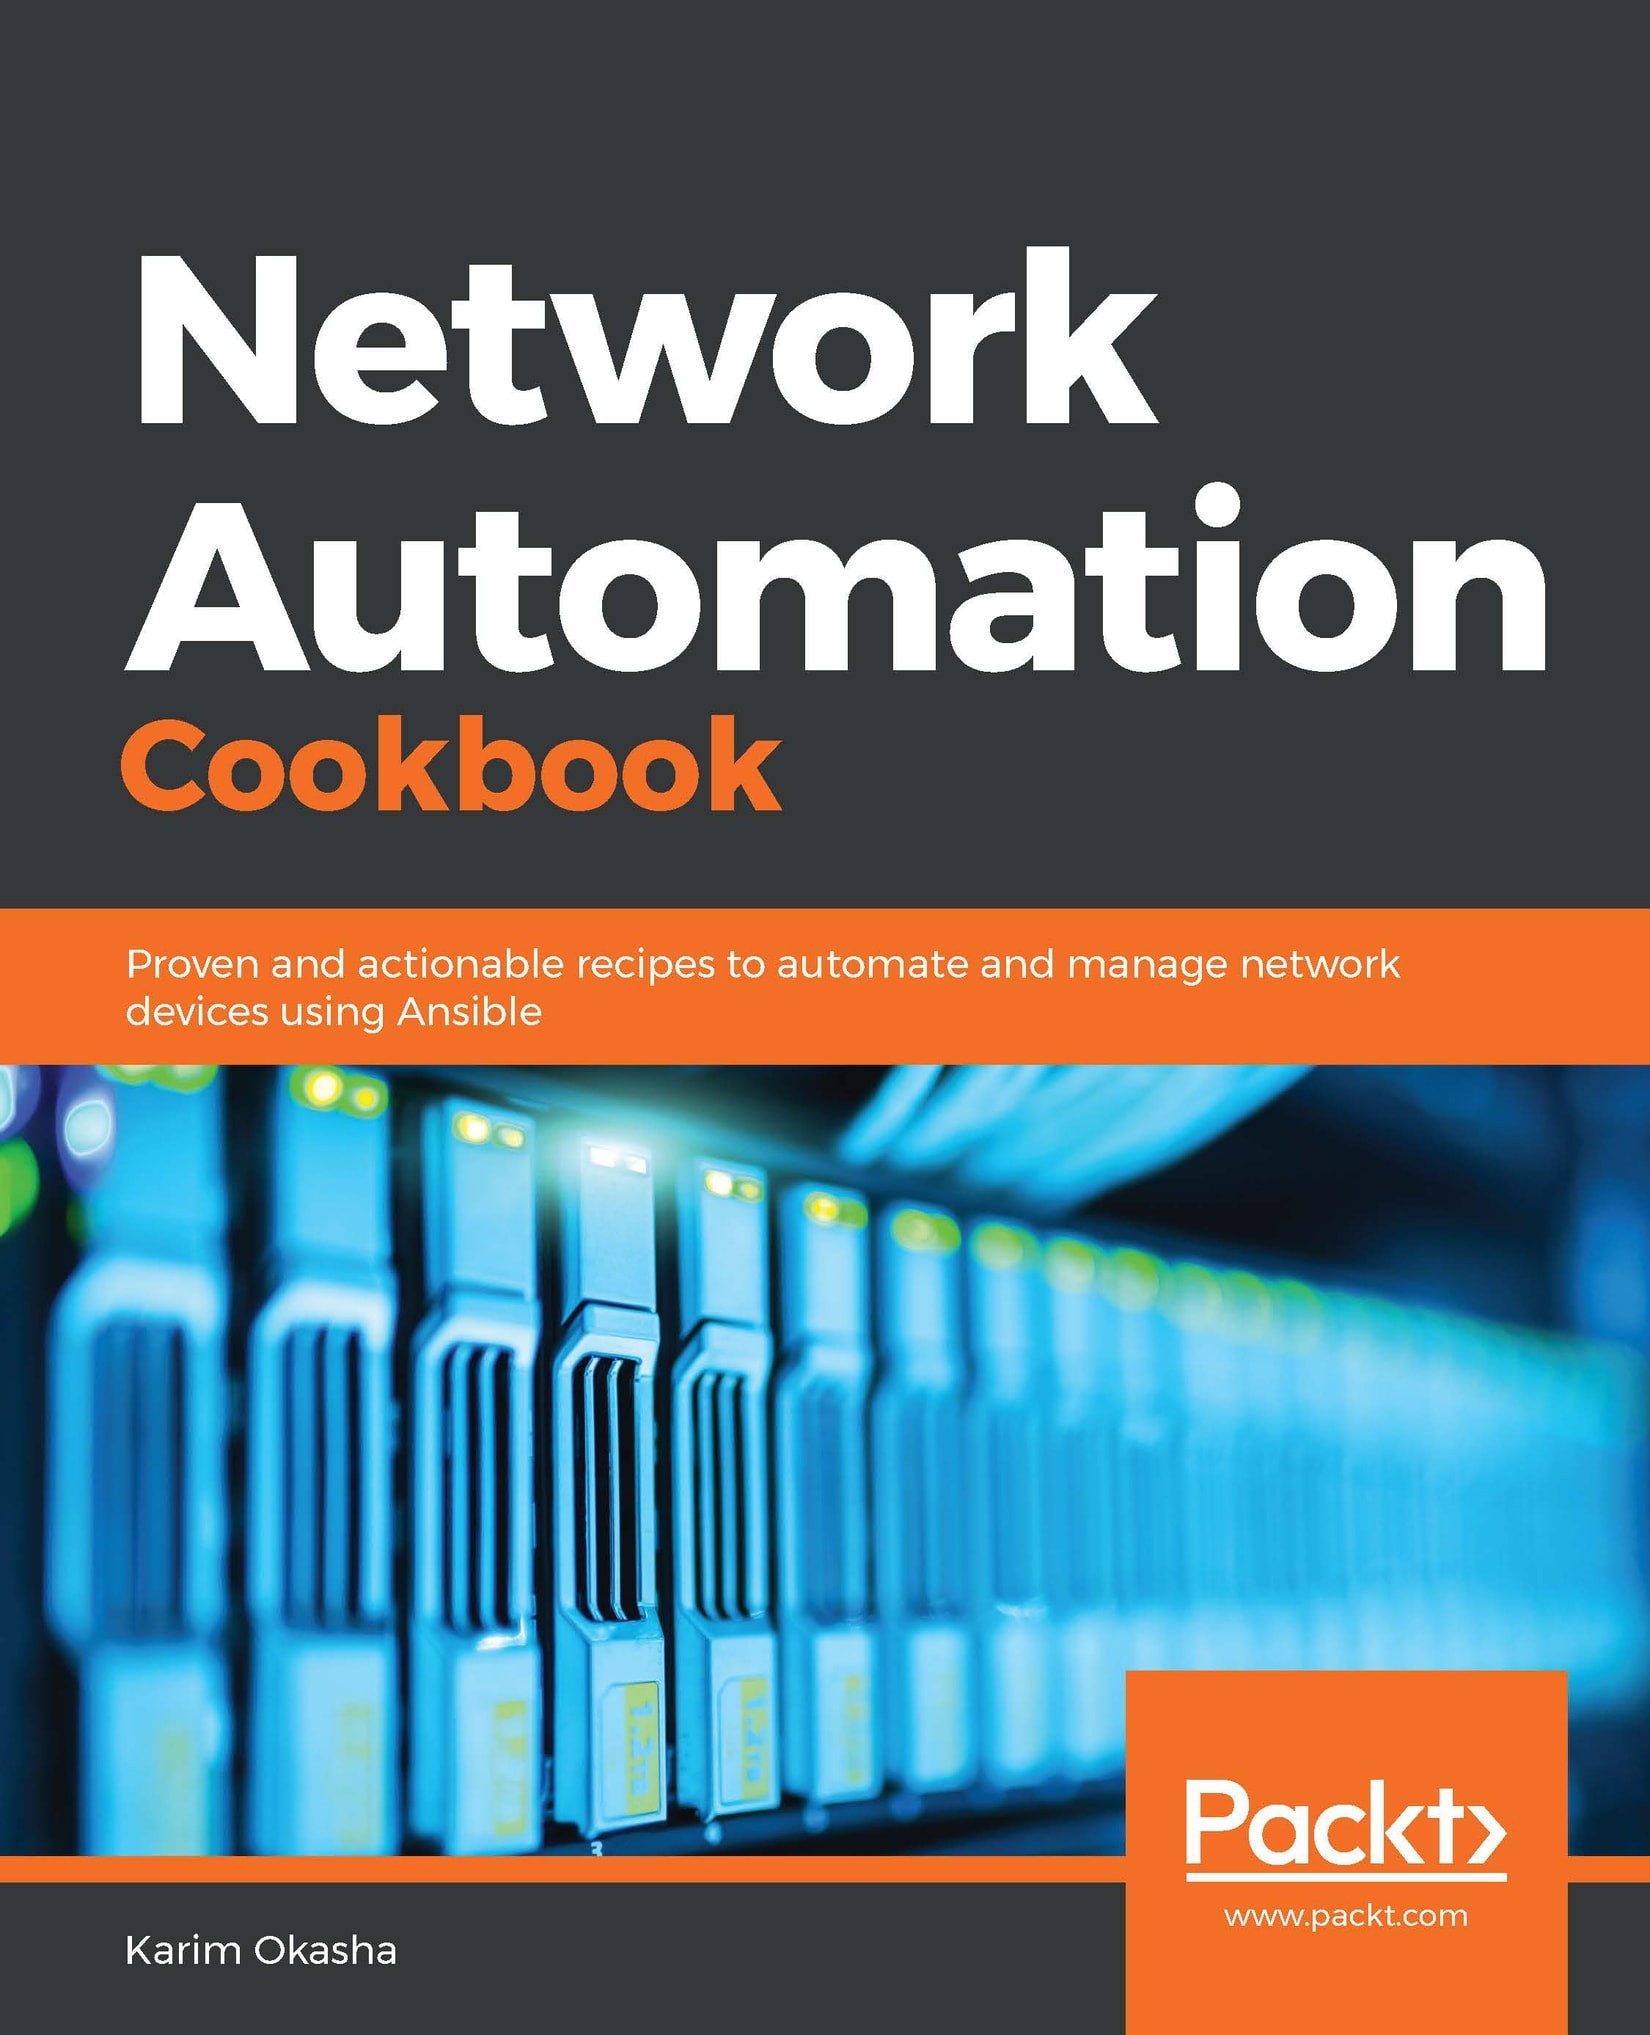 Network Automation Cookbook: Proven and Actionable Recipes to Automate and Manage Network Devices Using Ansible